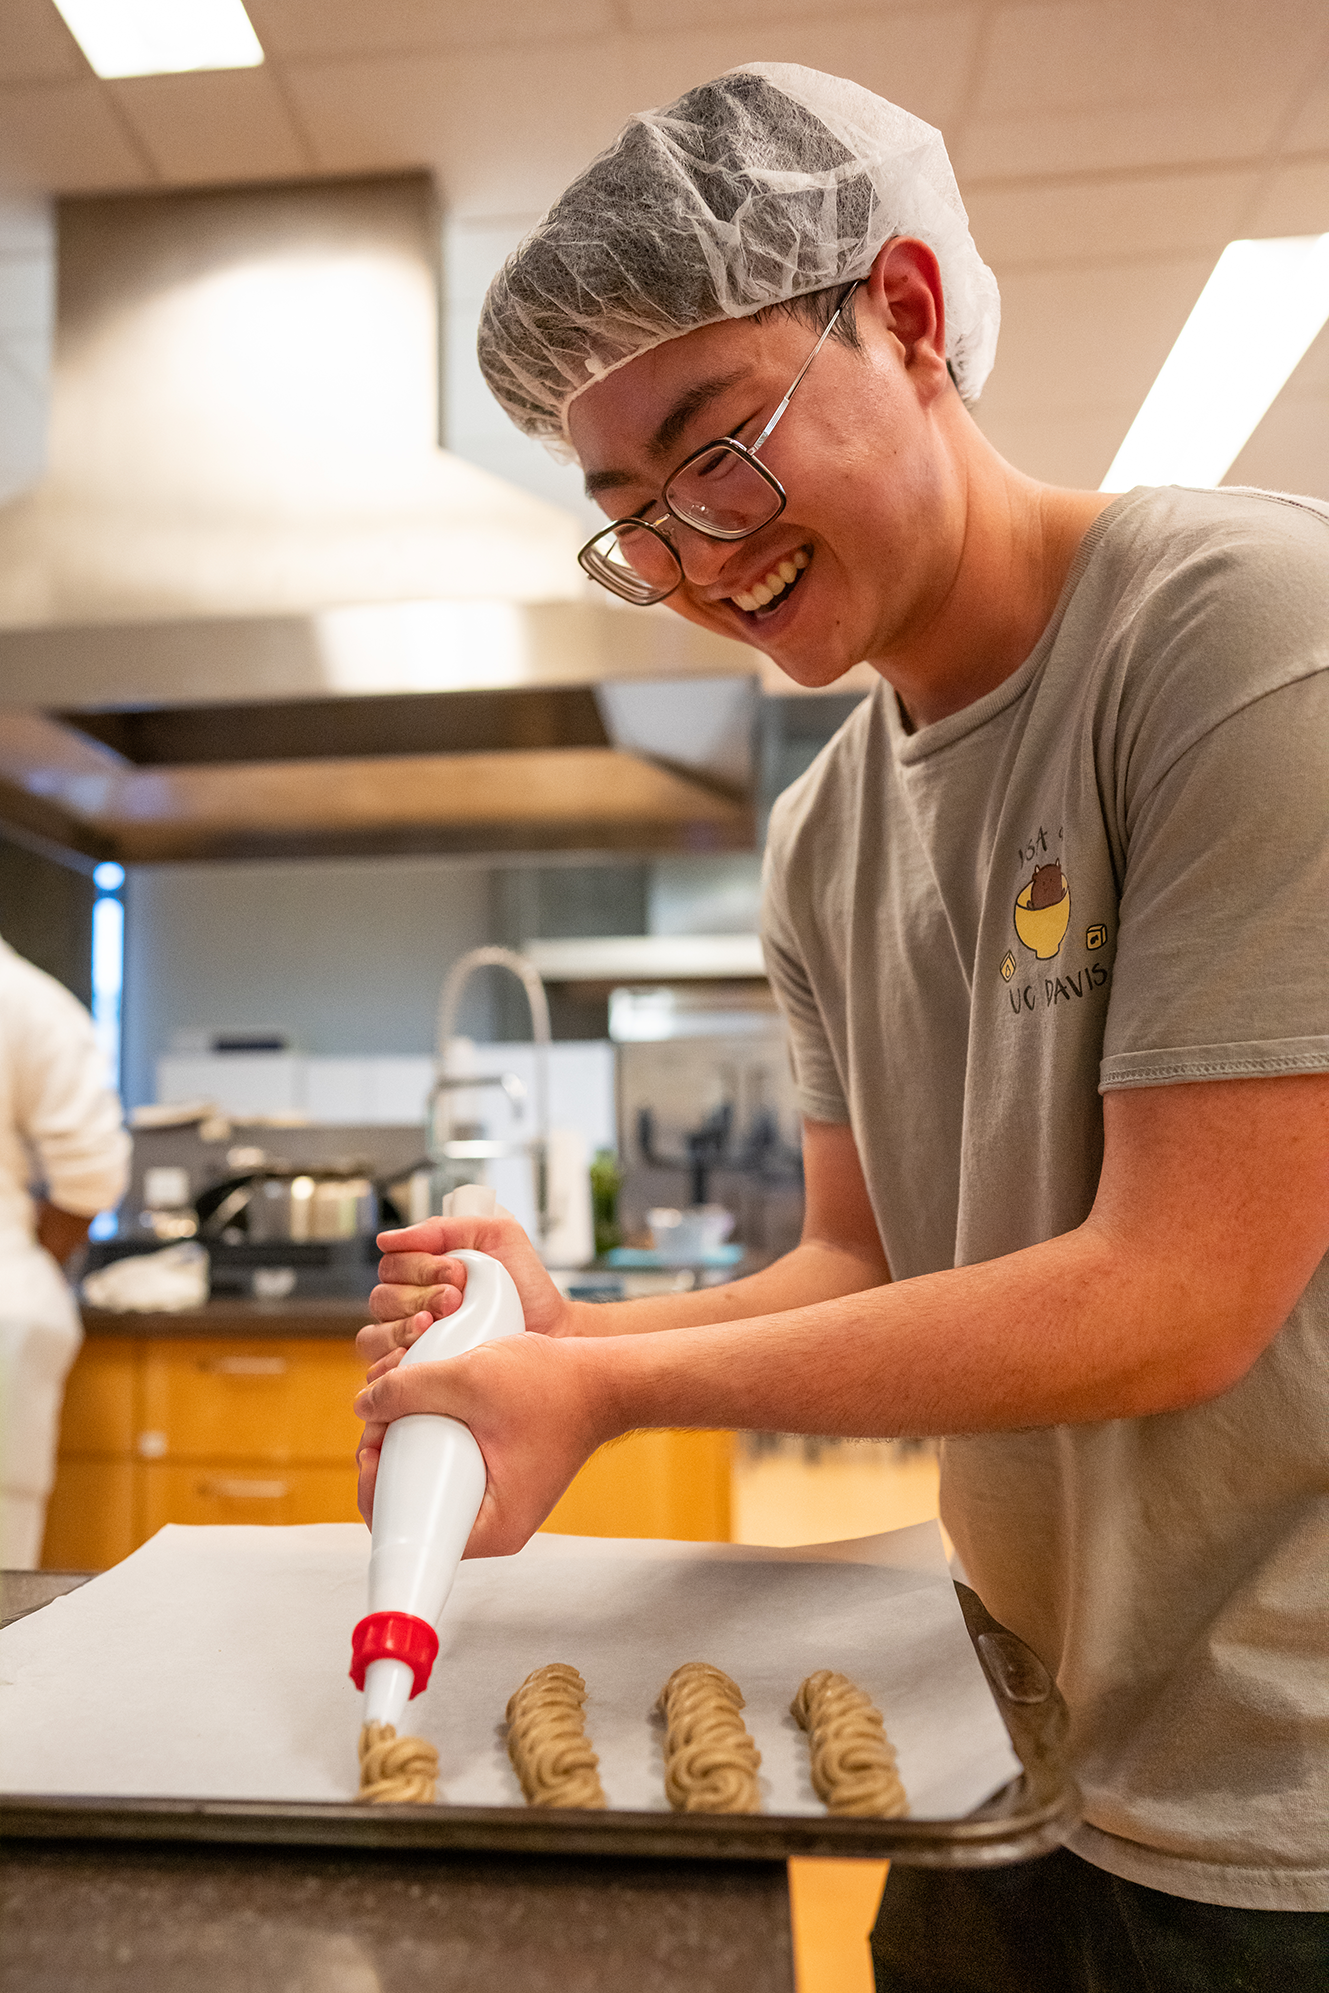 Scott Lo, senior majoring in food science and technology, cooking churros with his team. Photo by: Jael Mackendorf, UC Davis.